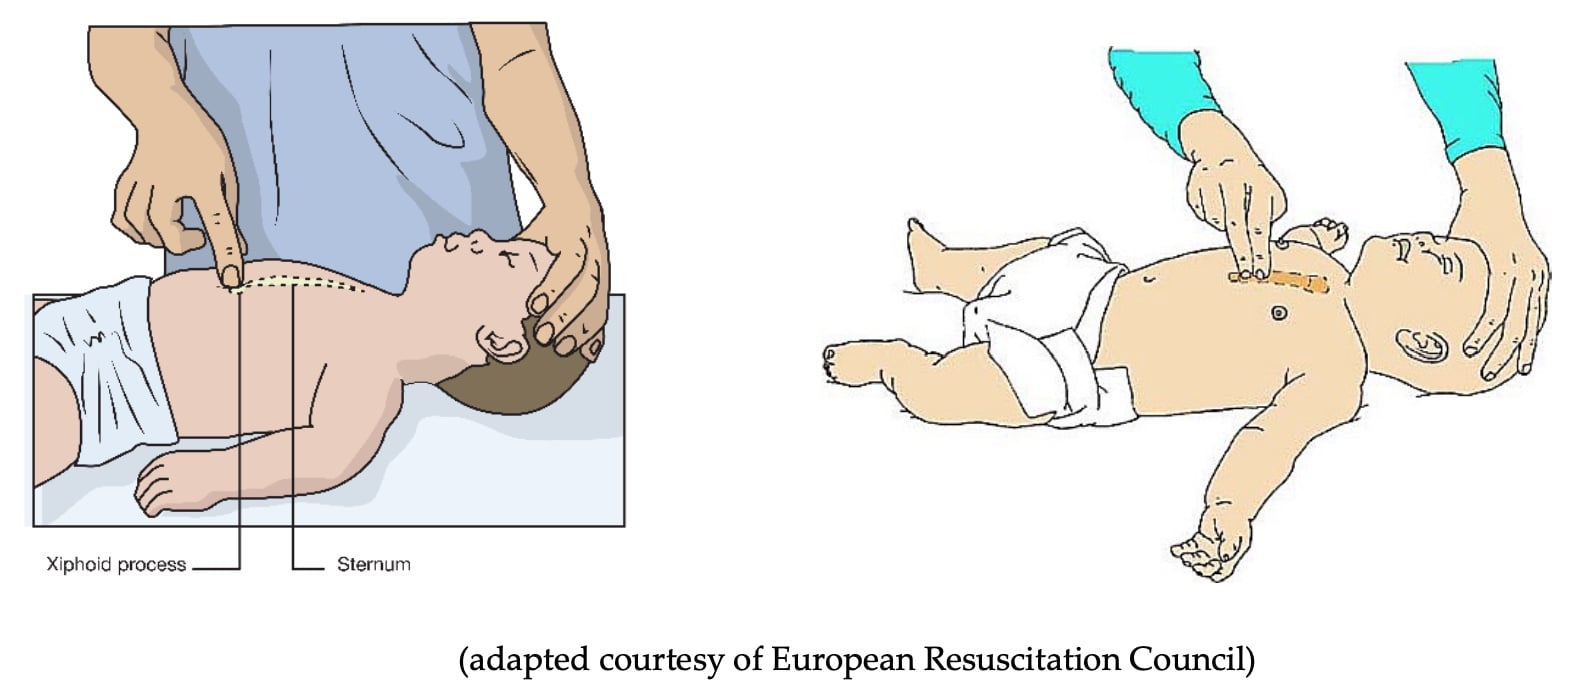 Locating the site of chest compressions in infant CPR